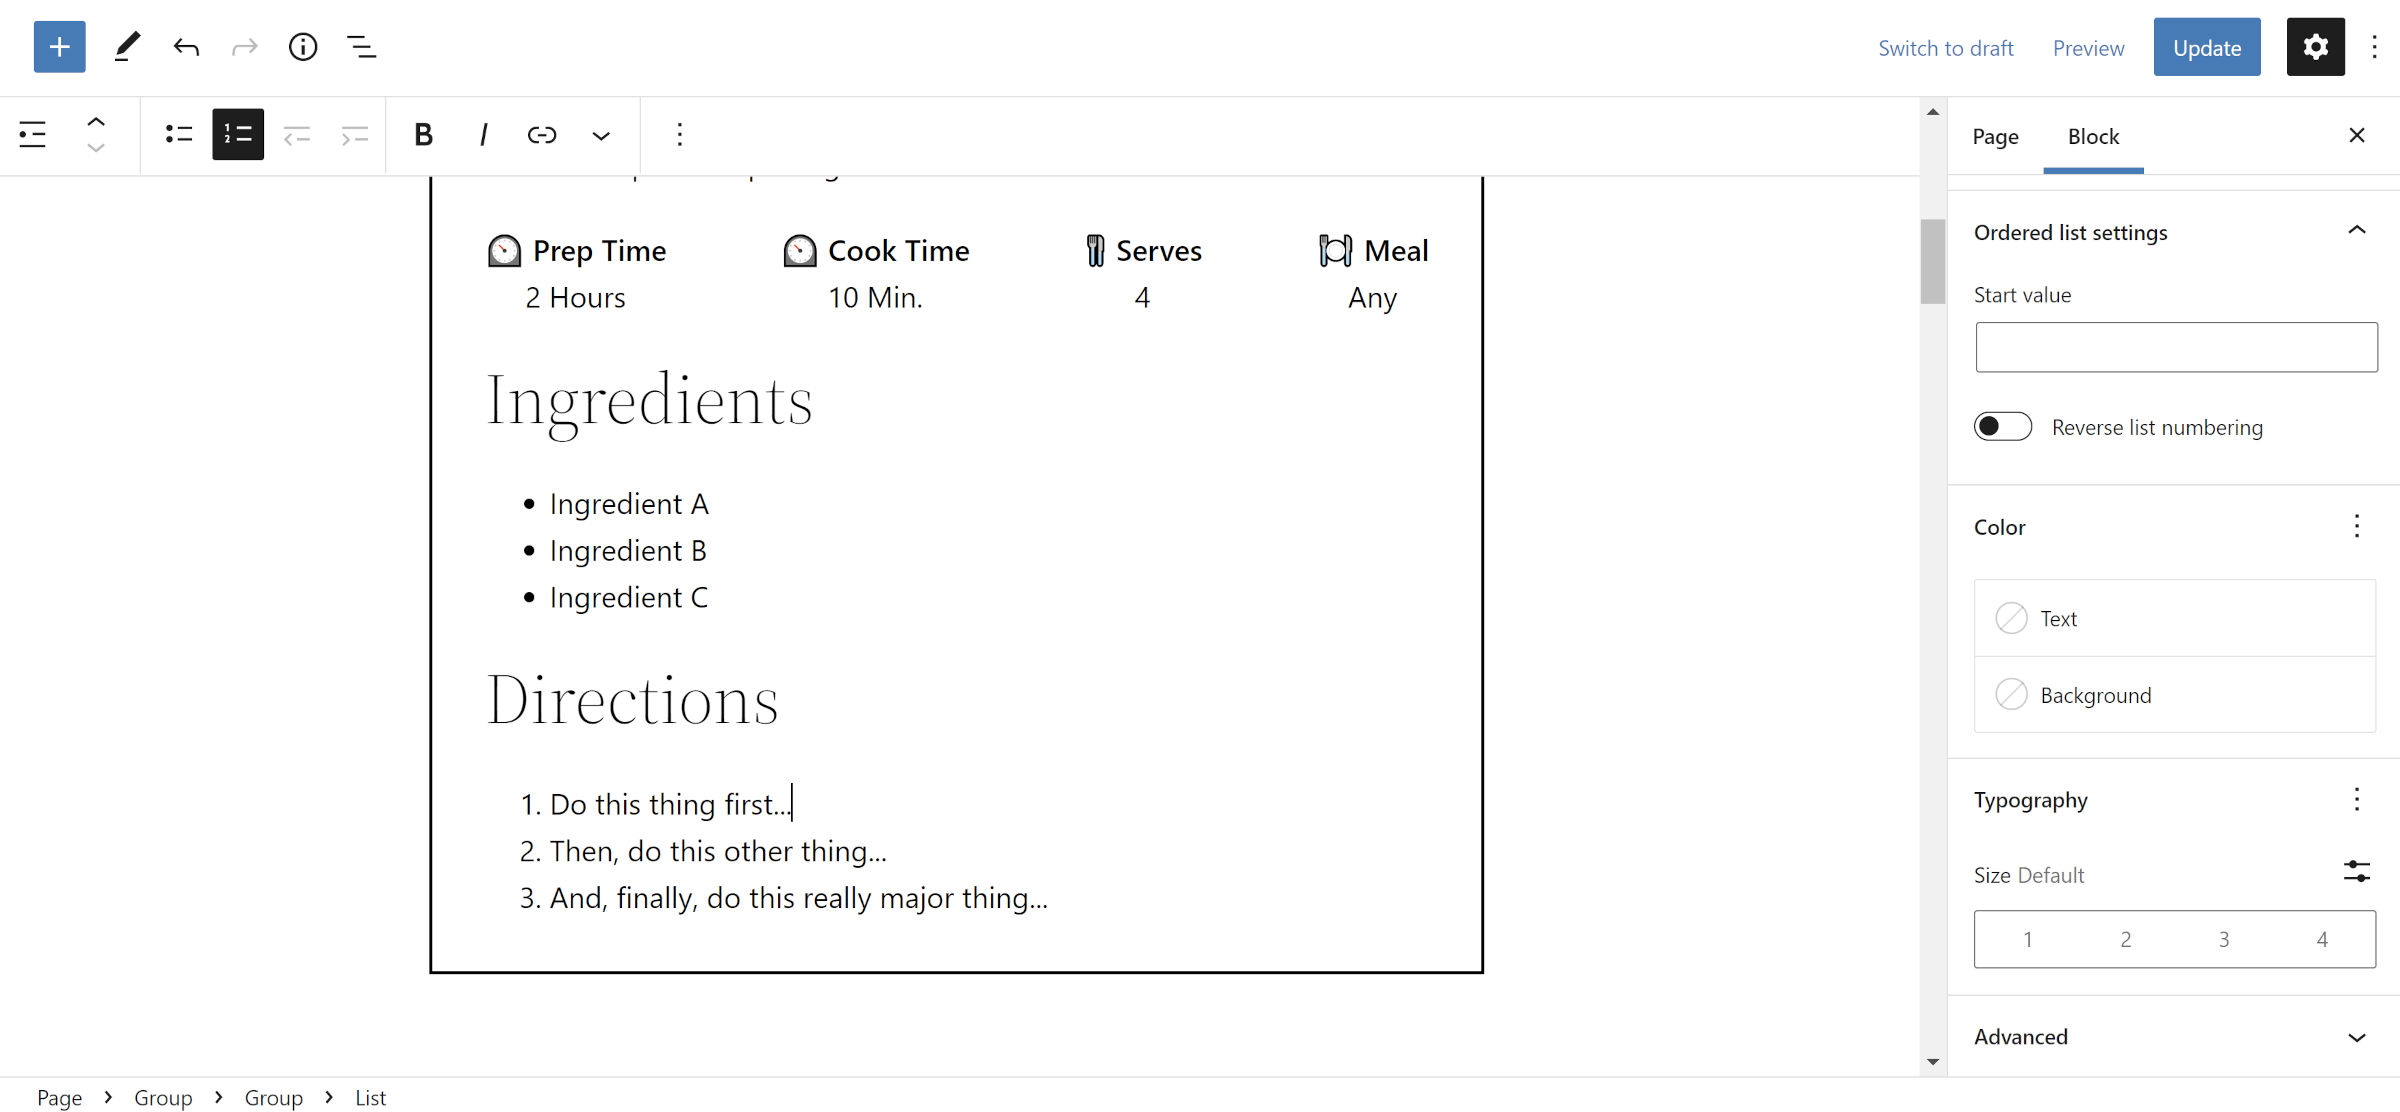 A recipe card in the WordPress editor.  Shown is the metadata, followed by ingredients and directions lists.